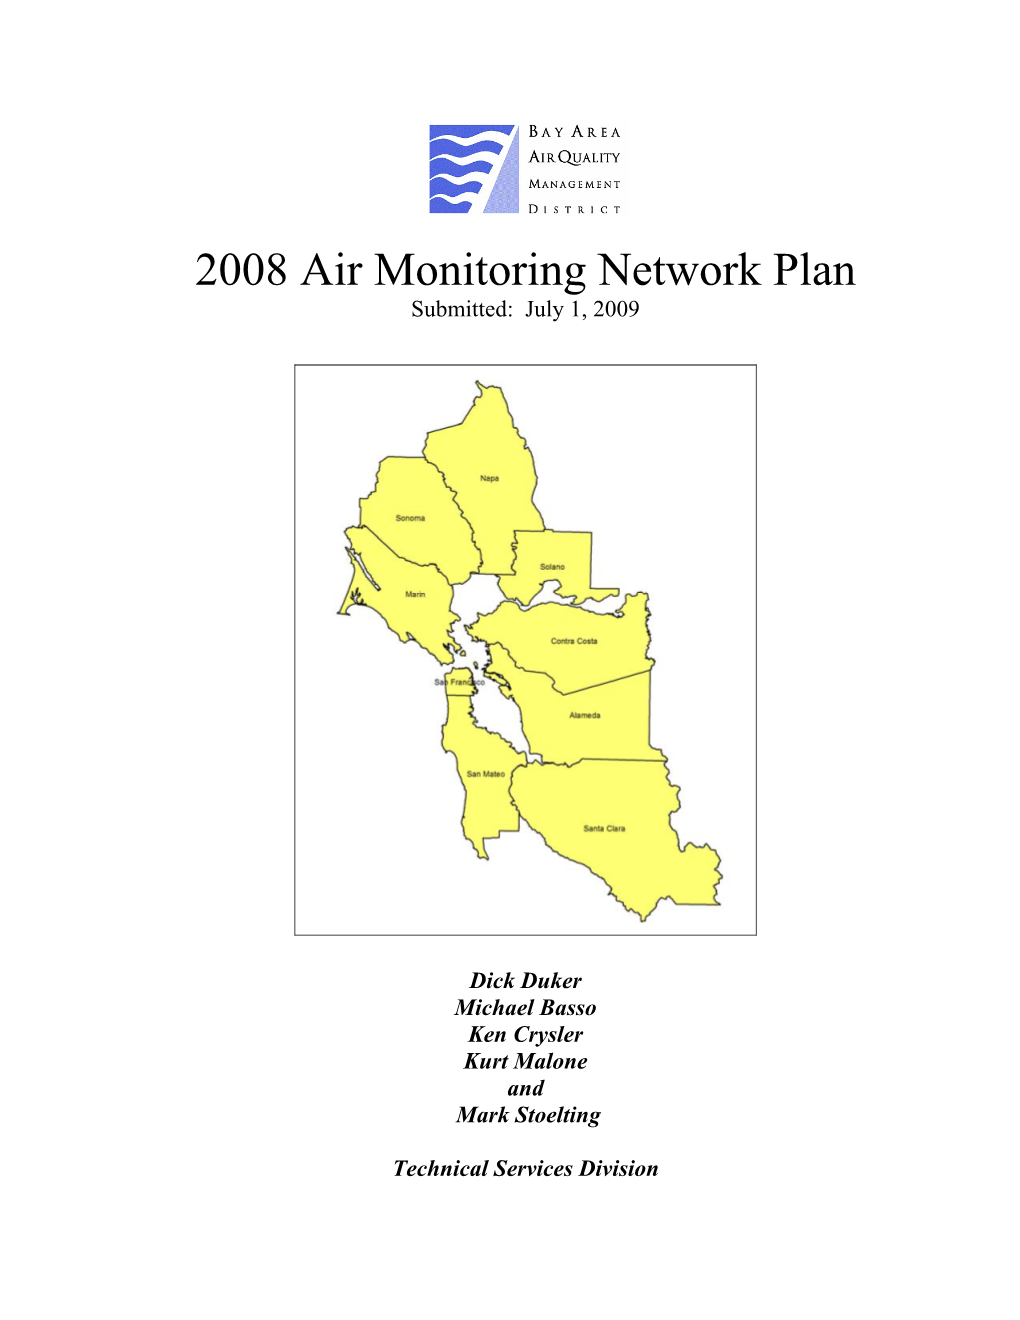 2008 Air Monitoring Network Plan Submitted: July 1, 2009